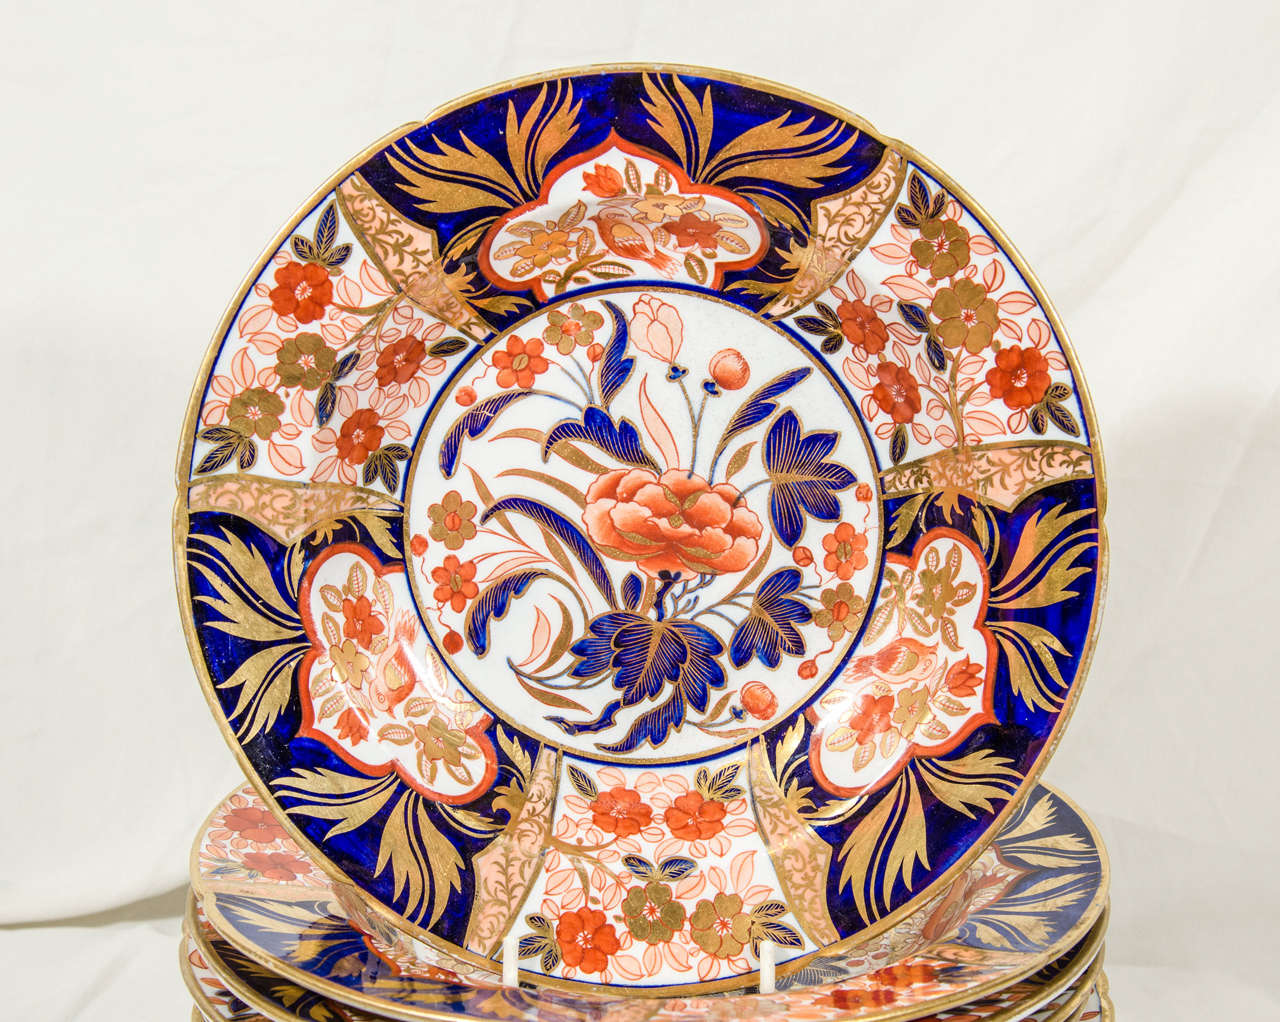 A set of 14 Coalport Imari dinner plates decorated with lavishly gilded cobalt blue and iron red. The pattern features panels and lappets with songbirds centered around a large peony.
Known as the Peony pattern it is a vibrant example of Regency